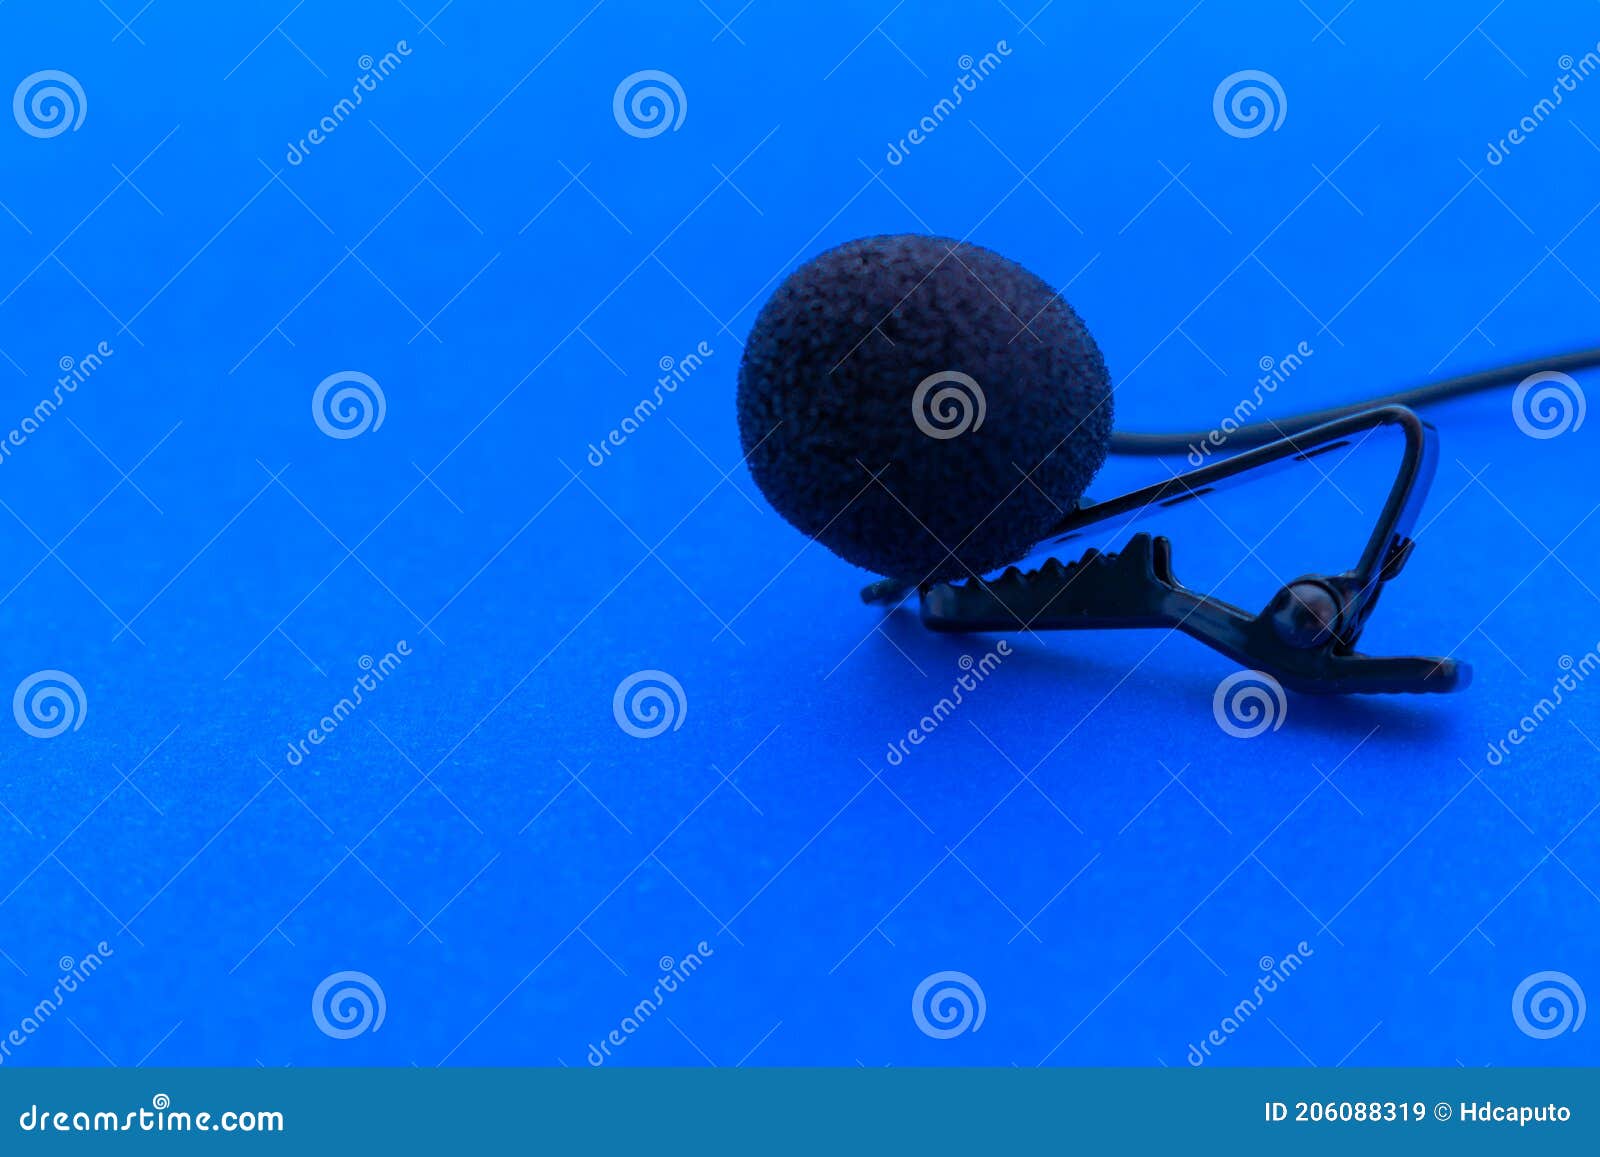 lavalier or lapel microphone on a blue surface, very close-up. the details of the grip clip or bra and the sponge against the wind